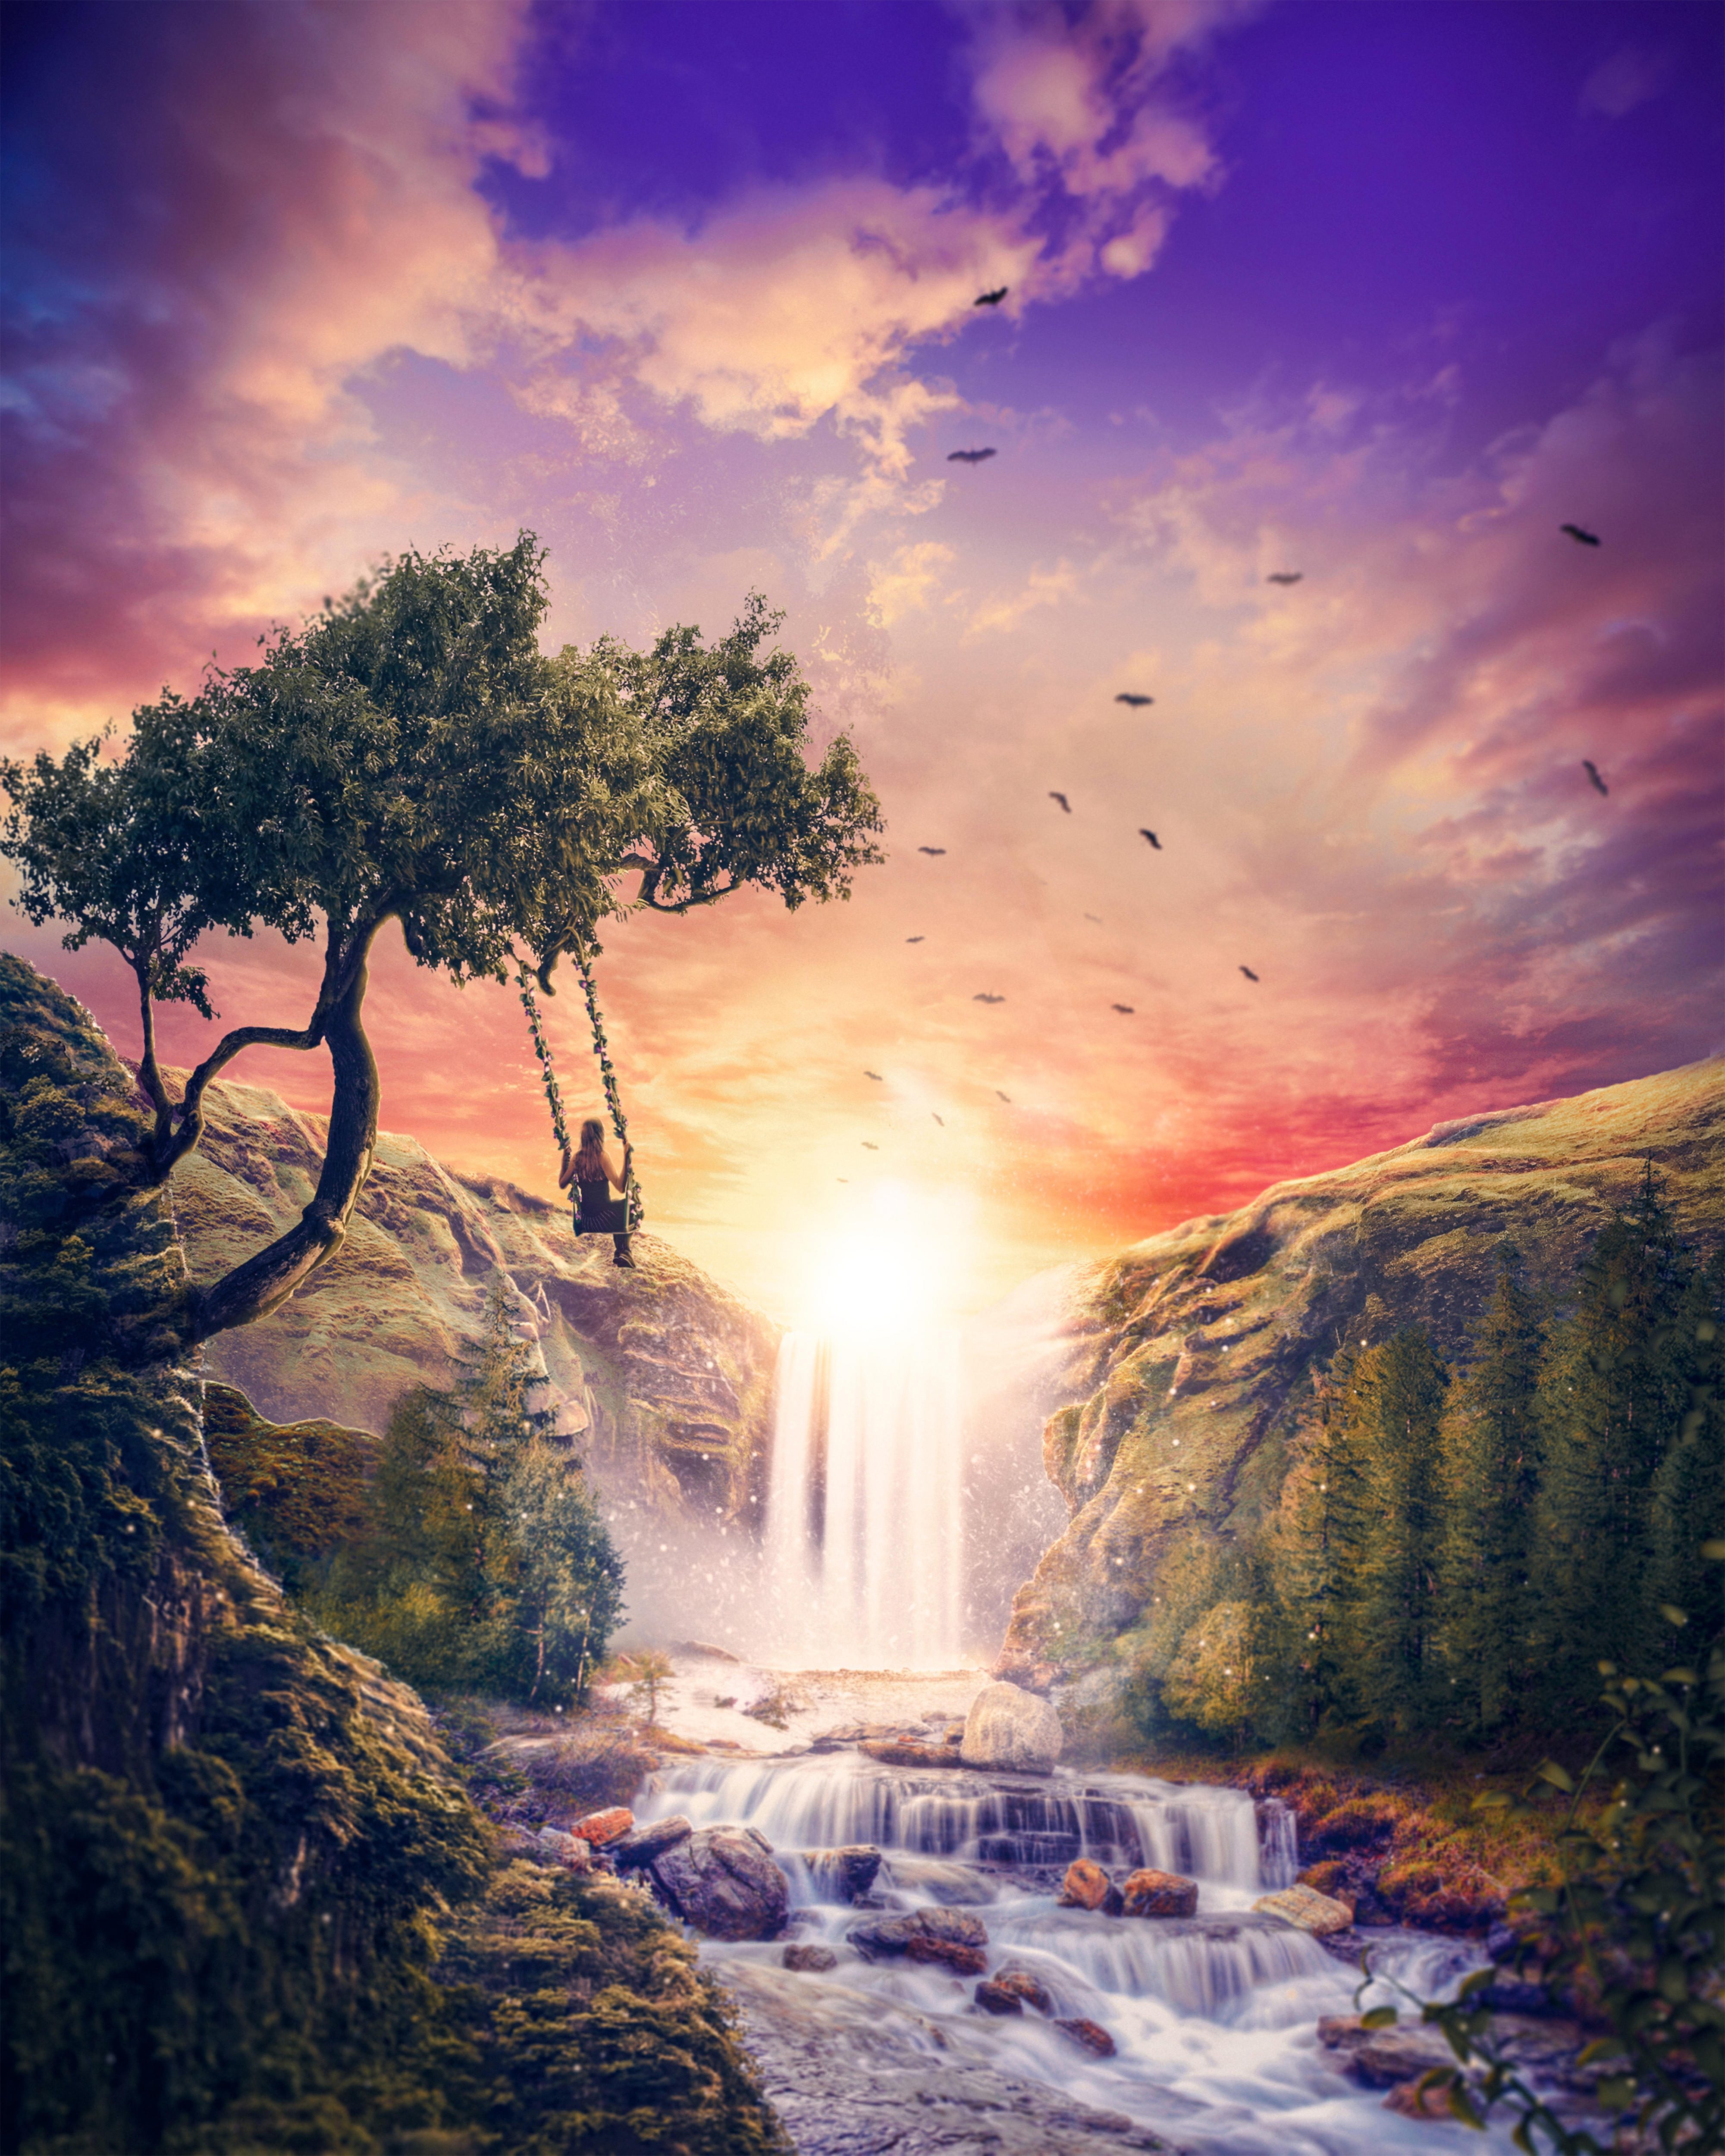 AADEE CRAFT A Beautiful Nature Scenery of Waterfall Sunset Landscape Canvas  Wall Painting With Wooden Frame For Living Room Bedroom Drawing Room Hotel  Office Size Large (48x24 inches) : Amazon.in: Home &